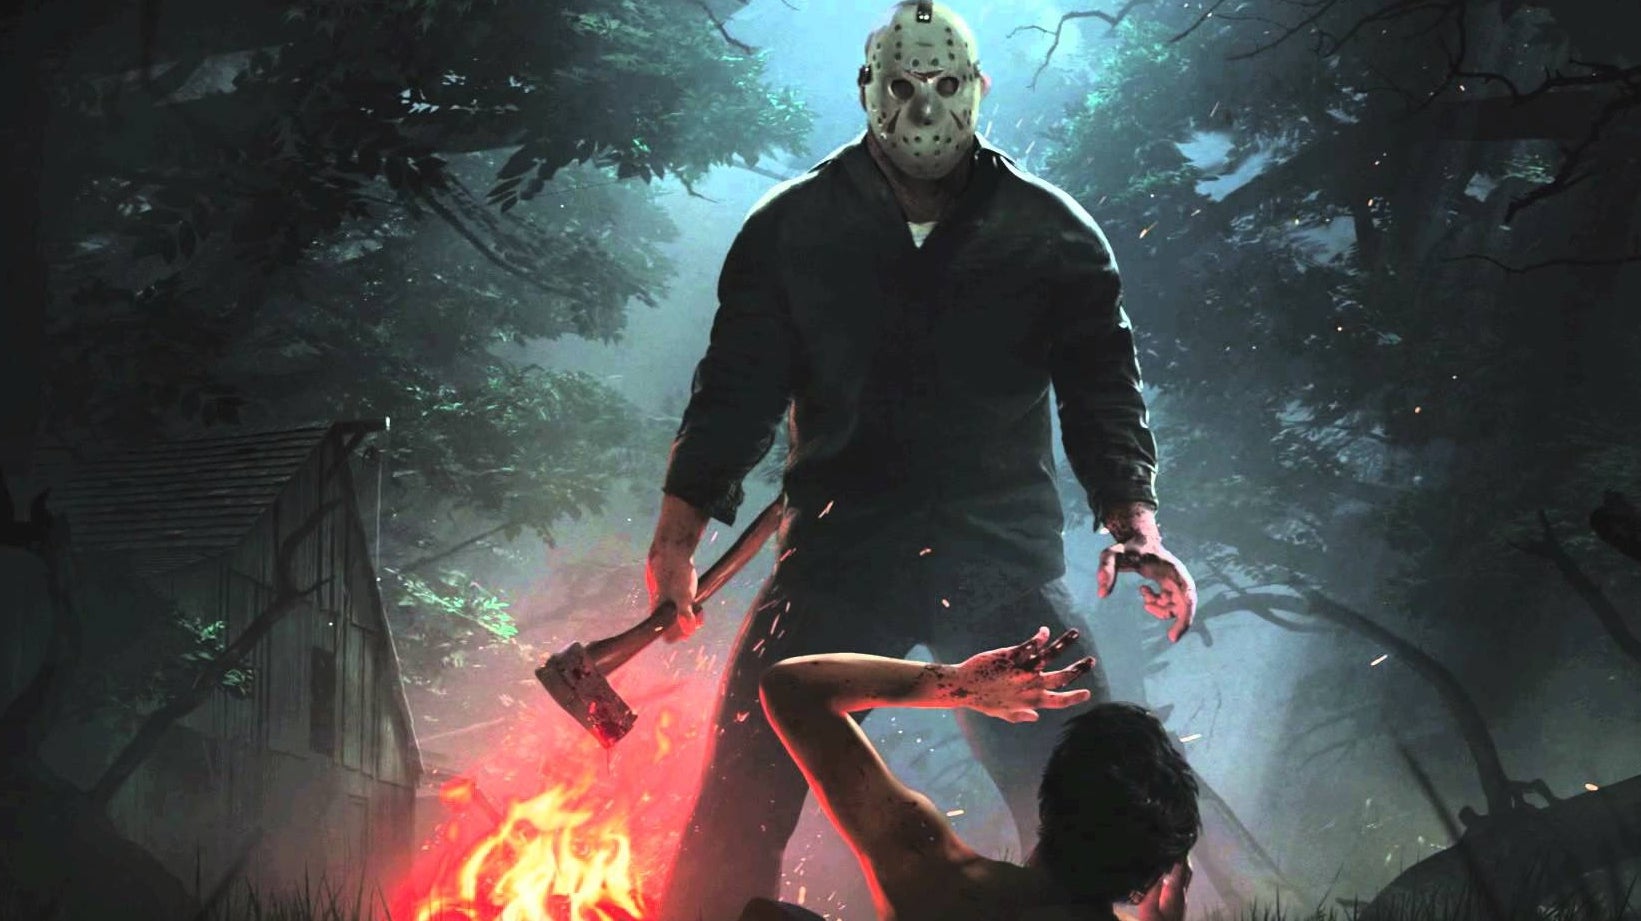 Image for Friday the 13th's long-awaited single-player challenge mode is out this week